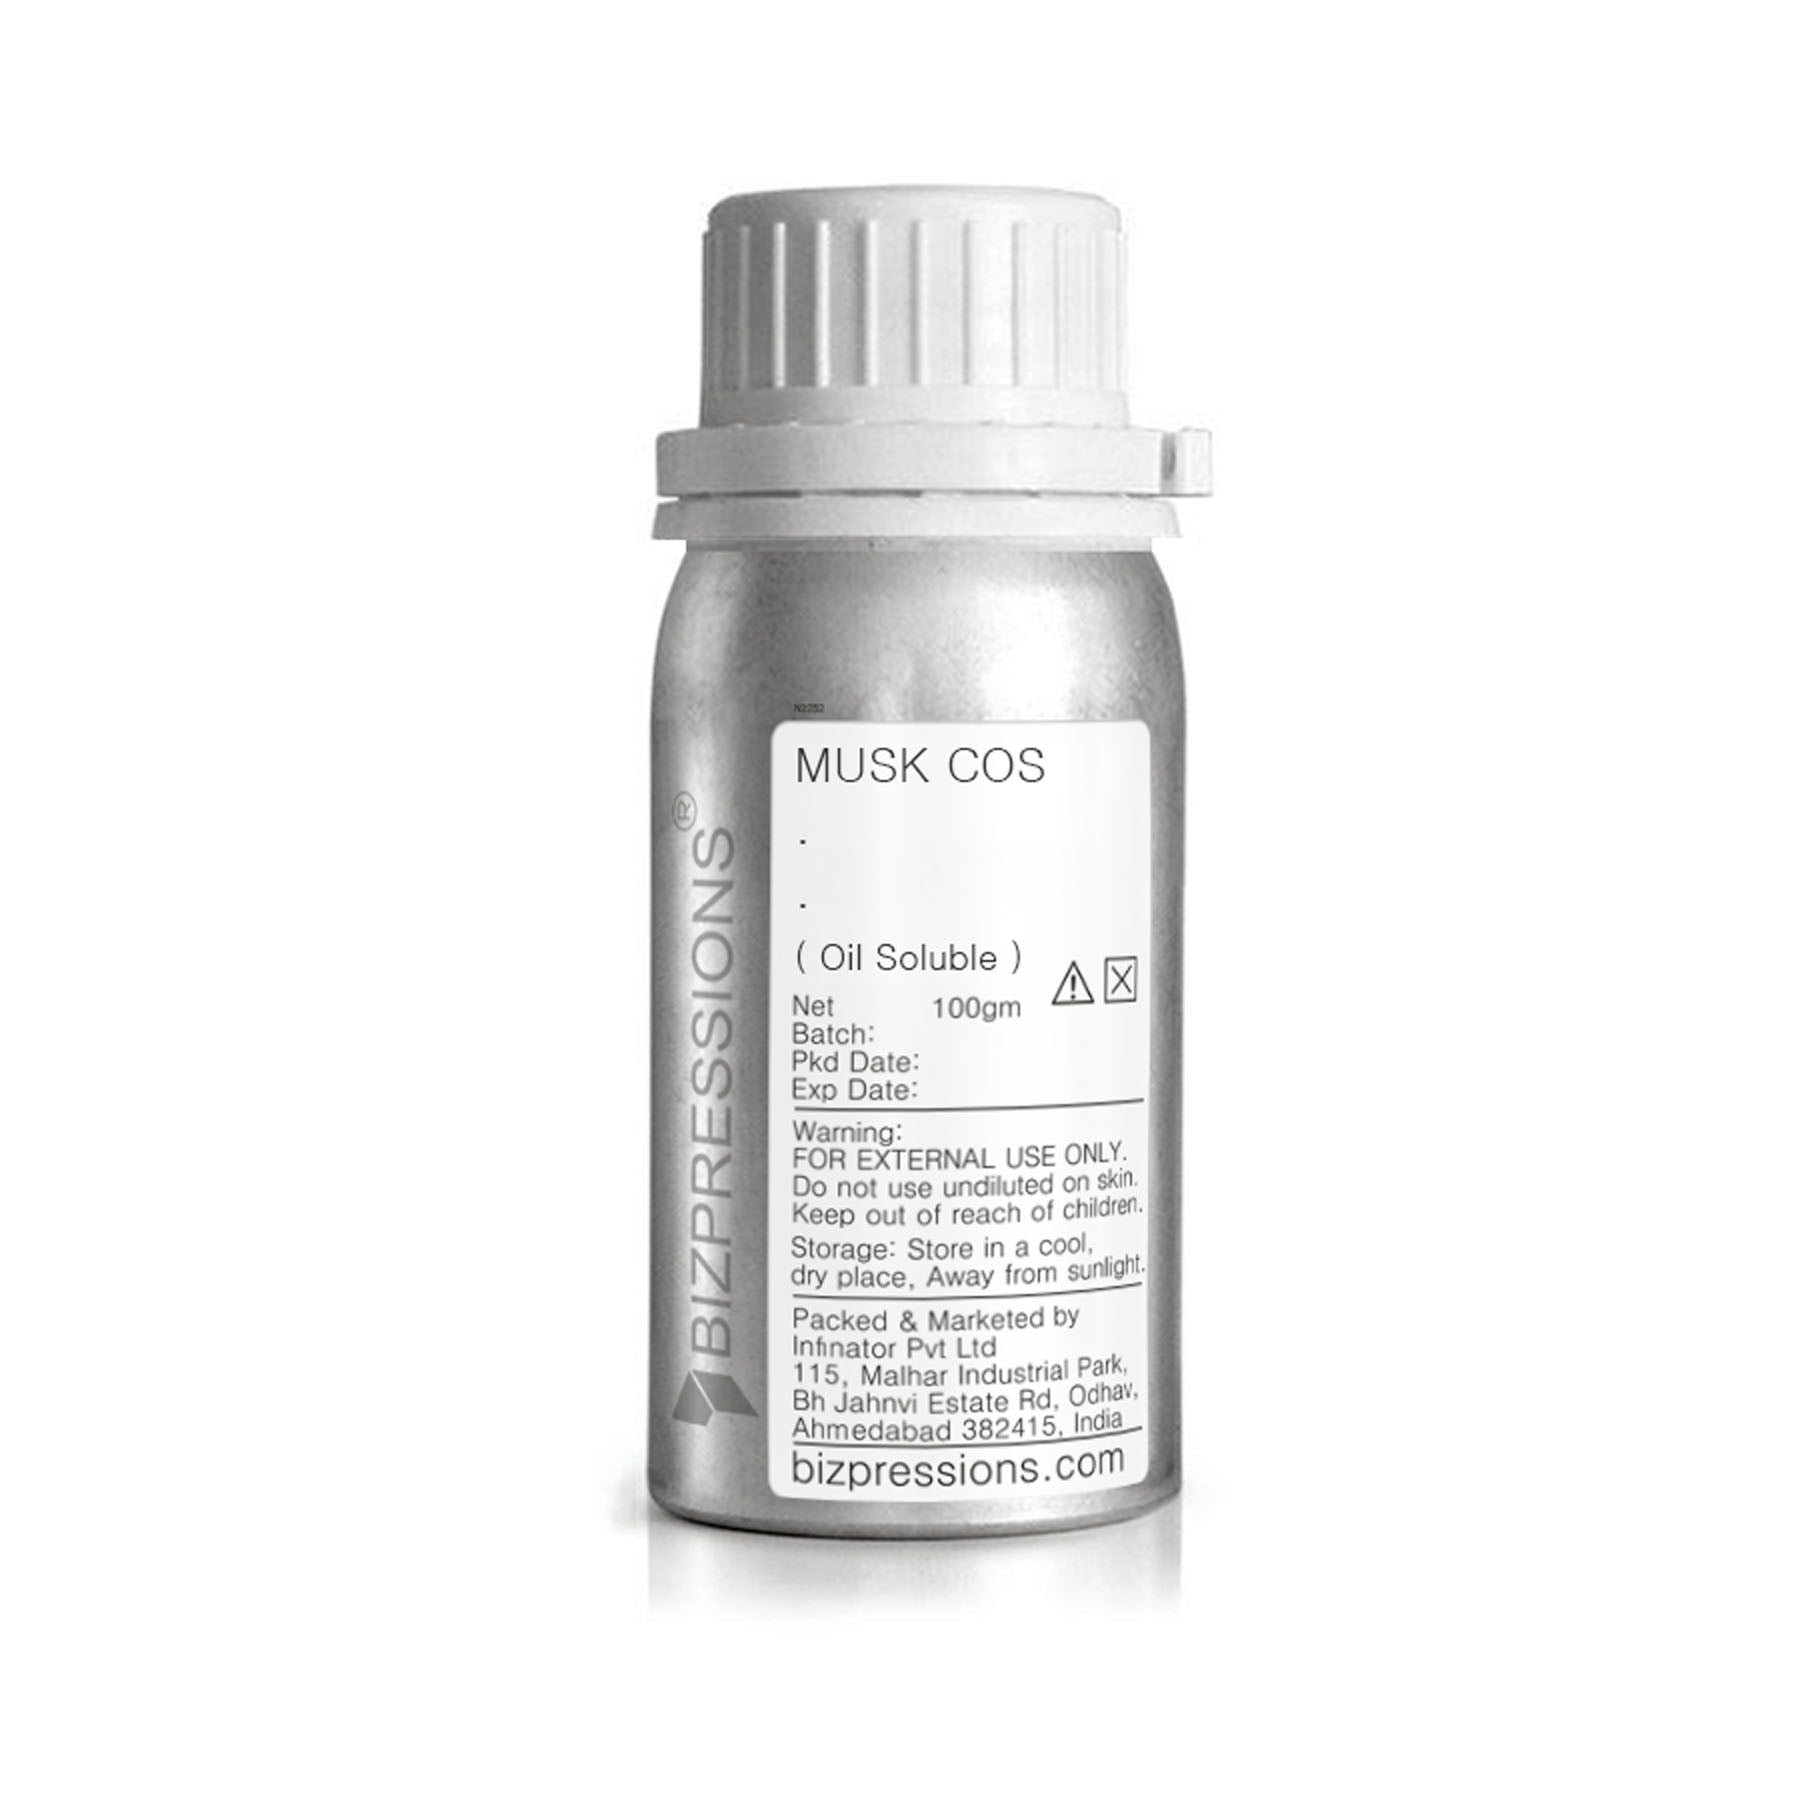 MUSK COS - Fragrance ( Oil Soluble ) - 100 gm